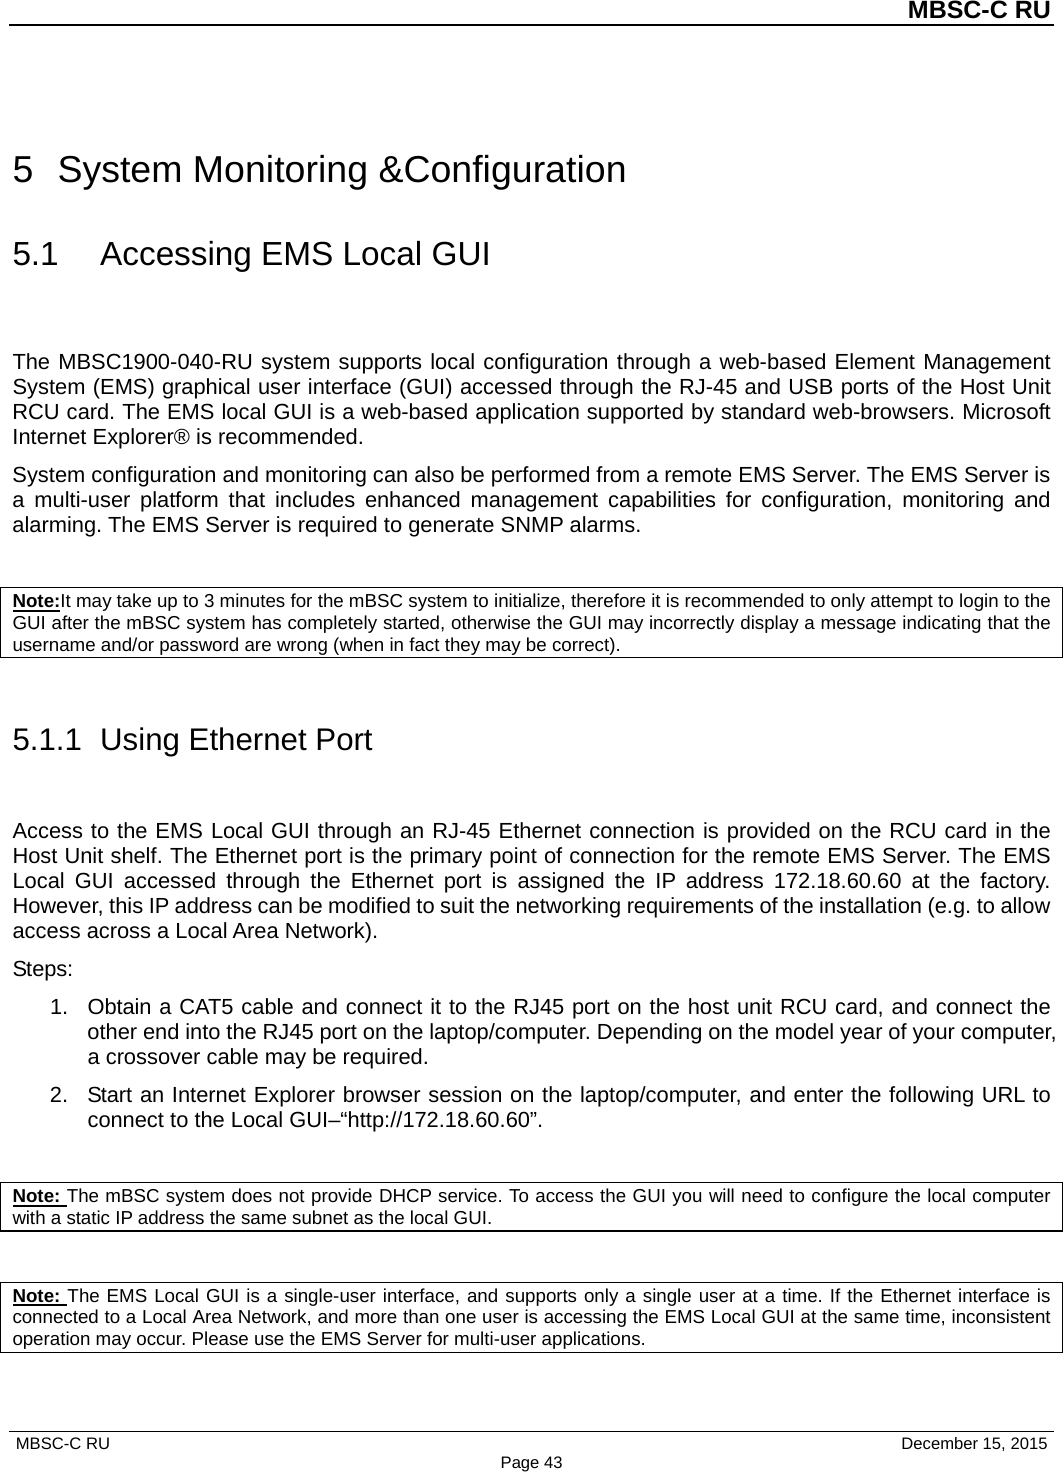          MBSC-C RU   MBSC-C RU                                     December 15, 2015 Page 43 5  System Monitoring &amp;Configuration 5.1 Accessing EMS Local GUI The MBSC1900-040-RU system supports local configuration through a web-based Element Management System (EMS) graphical user interface (GUI) accessed through the RJ-45 and USB ports of the Host Unit RCU card. The EMS local GUI is a web-based application supported by standard web-browsers. Microsoft Internet Explorer® is recommended. System configuration and monitoring can also be performed from a remote EMS Server. The EMS Server is a multi-user platform that includes enhanced management capabilities for configuration, monitoring and alarming. The EMS Server is required to generate SNMP alarms.  Note:It may take up to 3 minutes for the mBSC system to initialize, therefore it is recommended to only attempt to login to the GUI after the mBSC system has completely started, otherwise the GUI may incorrectly display a message indicating that the username and/or password are wrong (when in fact they may be correct).  5.1.1  Using Ethernet Port Access to the EMS Local GUI through an RJ-45 Ethernet connection is provided on the RCU card in the Host Unit shelf. The Ethernet port is the primary point of connection for the remote EMS Server. The EMS Local GUI accessed through the Ethernet port is assigned the IP address 172.18.60.60 at the factory. However, this IP address can be modified to suit the networking requirements of the installation (e.g. to allow access across a Local Area Network). Steps: 1. Obtain a CAT5 cable and connect it to the RJ45 port on the host unit RCU card, and connect the other end into the RJ45 port on the laptop/computer. Depending on the model year of your computer, a crossover cable may be required.   2. Start an Internet Explorer browser session on the laptop/computer, and enter the following URL to connect to the Local GUI–“http://172.18.60.60”.    Note: The mBSC system does not provide DHCP service. To access the GUI you will need to configure the local computer with a static IP address the same subnet as the local GUI.  Note: The EMS Local GUI is a single-user interface, and supports only a single user at a time. If the Ethernet interface is connected to a Local Area Network, and more than one user is accessing the EMS Local GUI at the same time, inconsistent operation may occur. Please use the EMS Server for multi-user applications. 